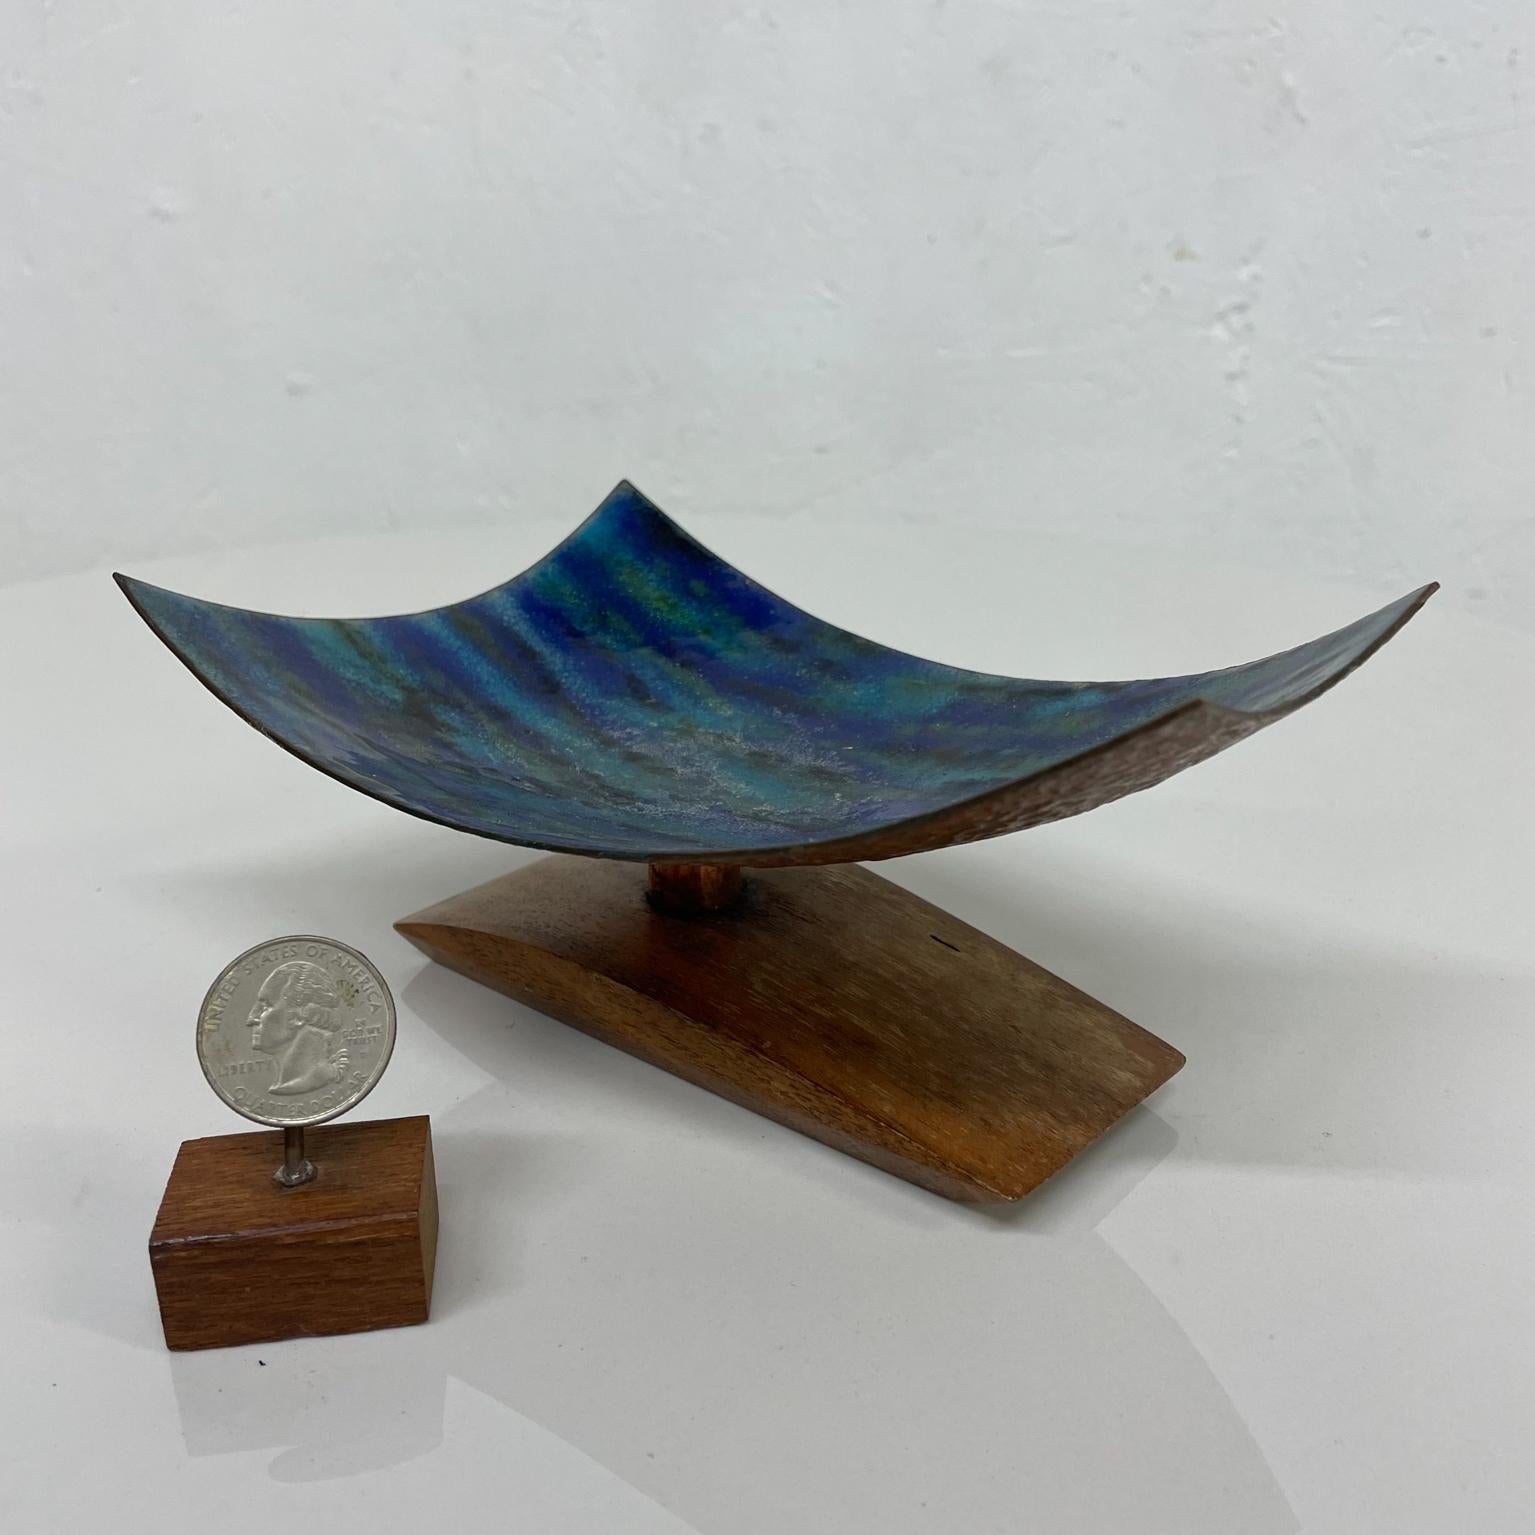 Decorative Sculpture blue with modern curved lines. 
Mounted on Koa Wood.
7 long x 4.63w x 2.88
It can be used a dish or splendid as stand-alone sculpture.
No signature. 
Preowned original vintage condition.
See images please.

